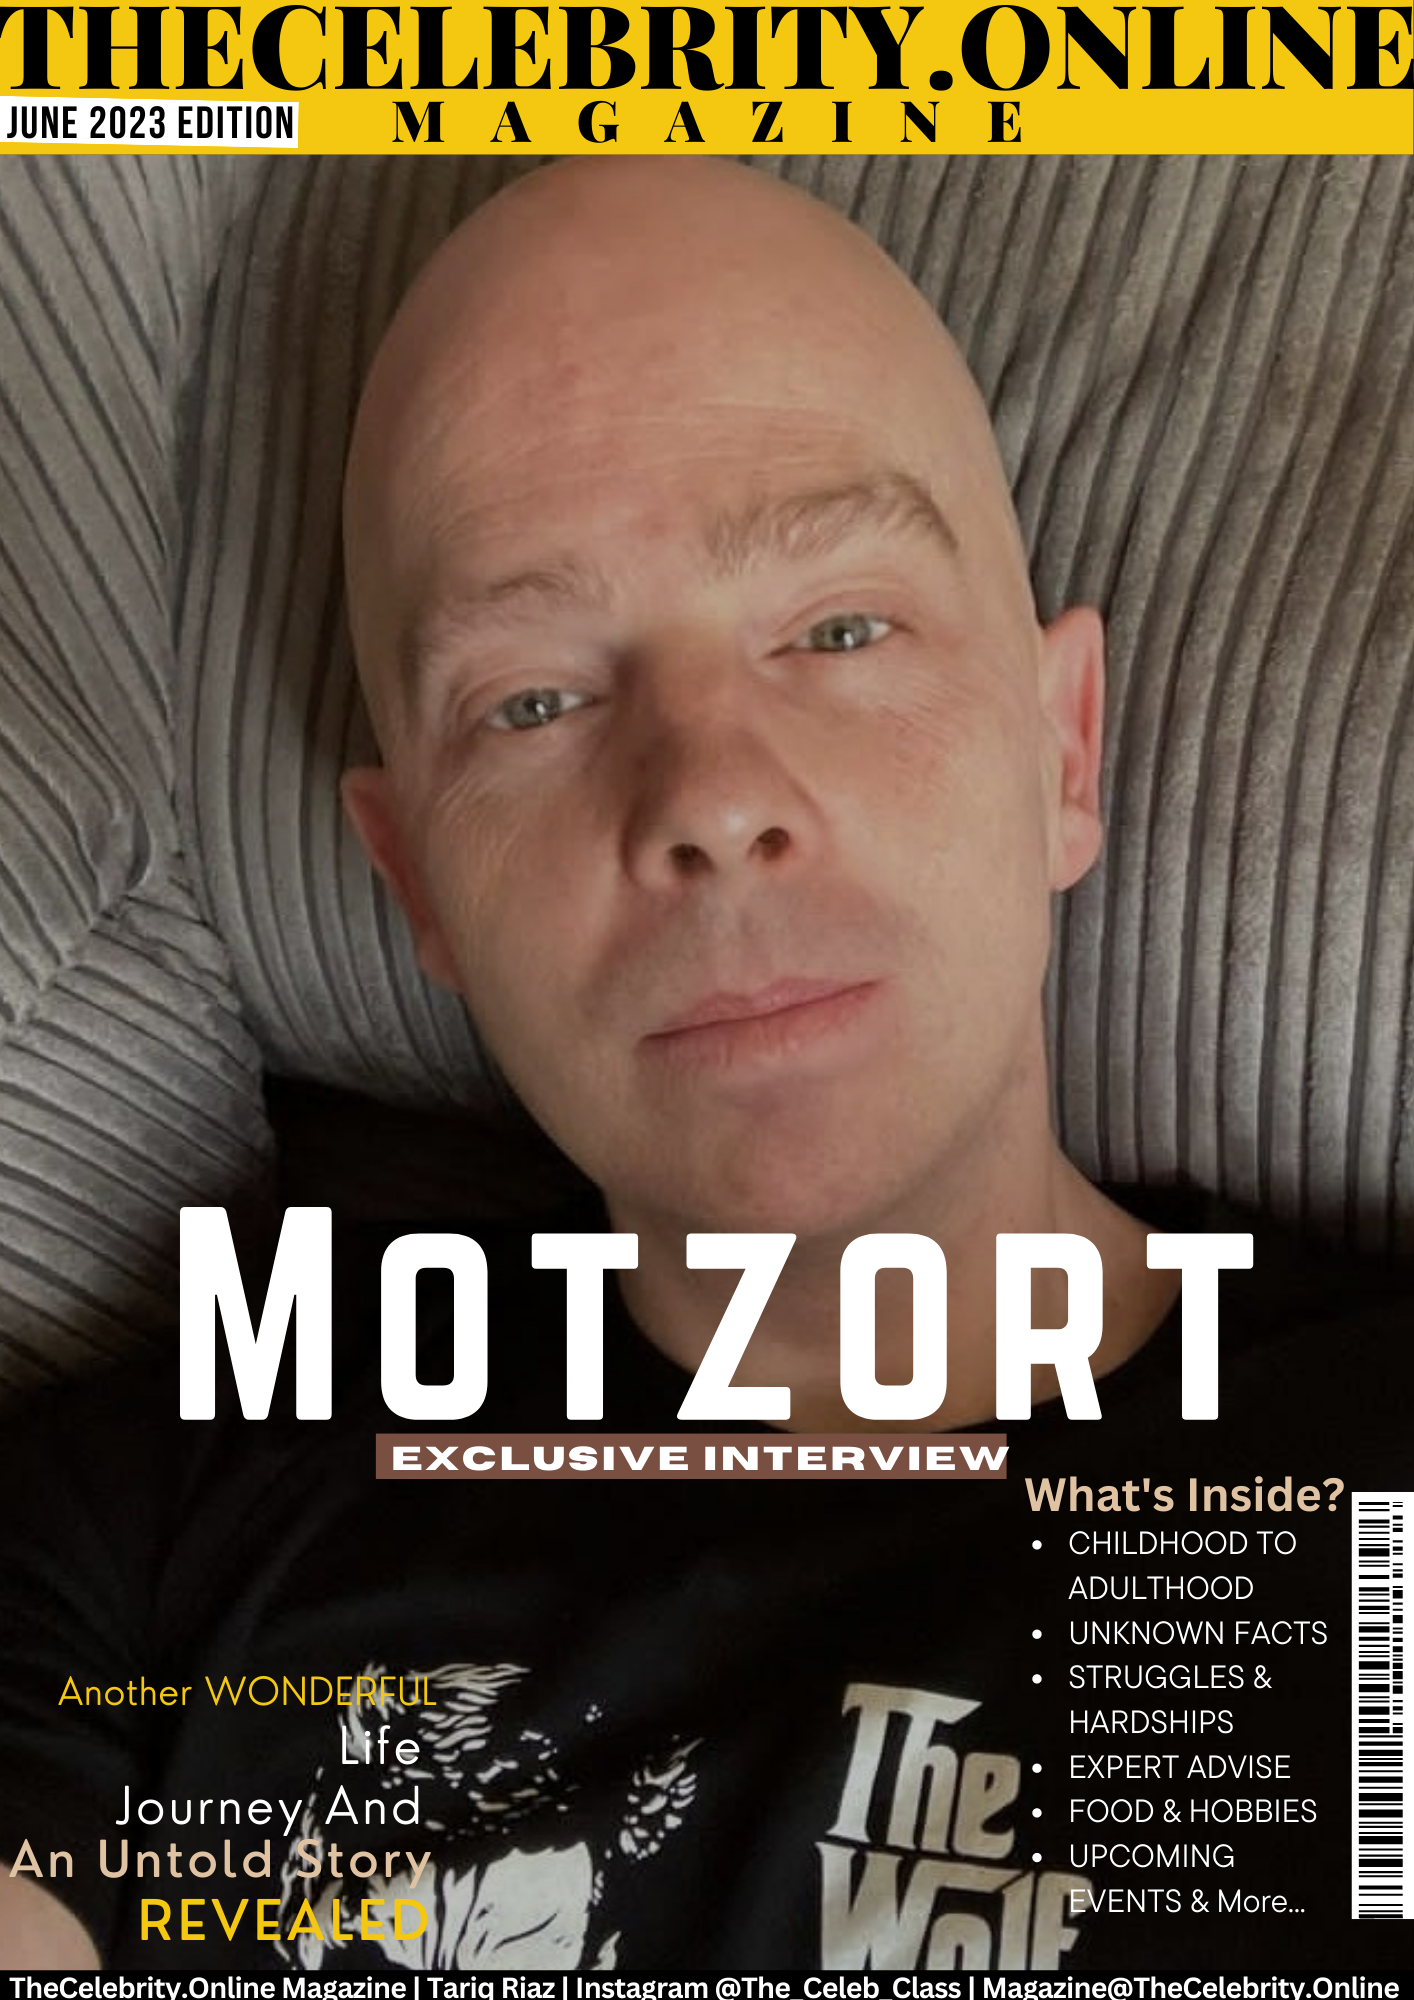 Motzort Exclusive Interview – ‘Try To Focus On The Things You Can Make A Difference With’